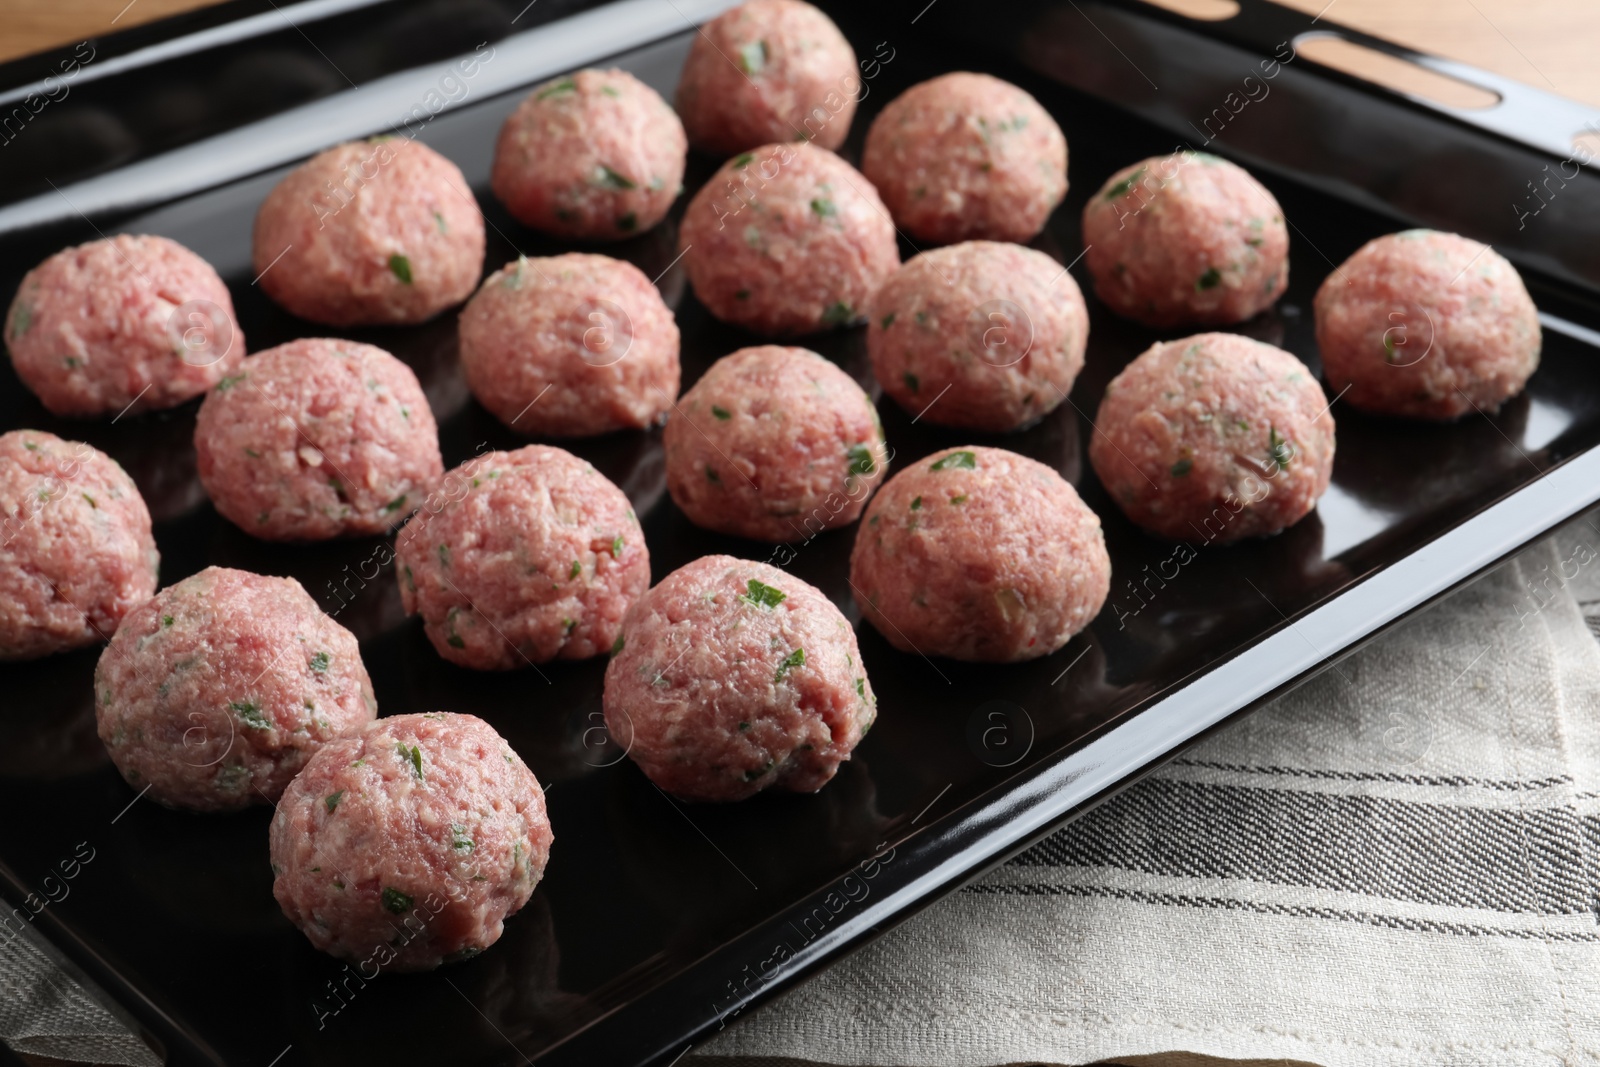 Photo of Baking dish with many fresh raw meatballs on kitchen towel